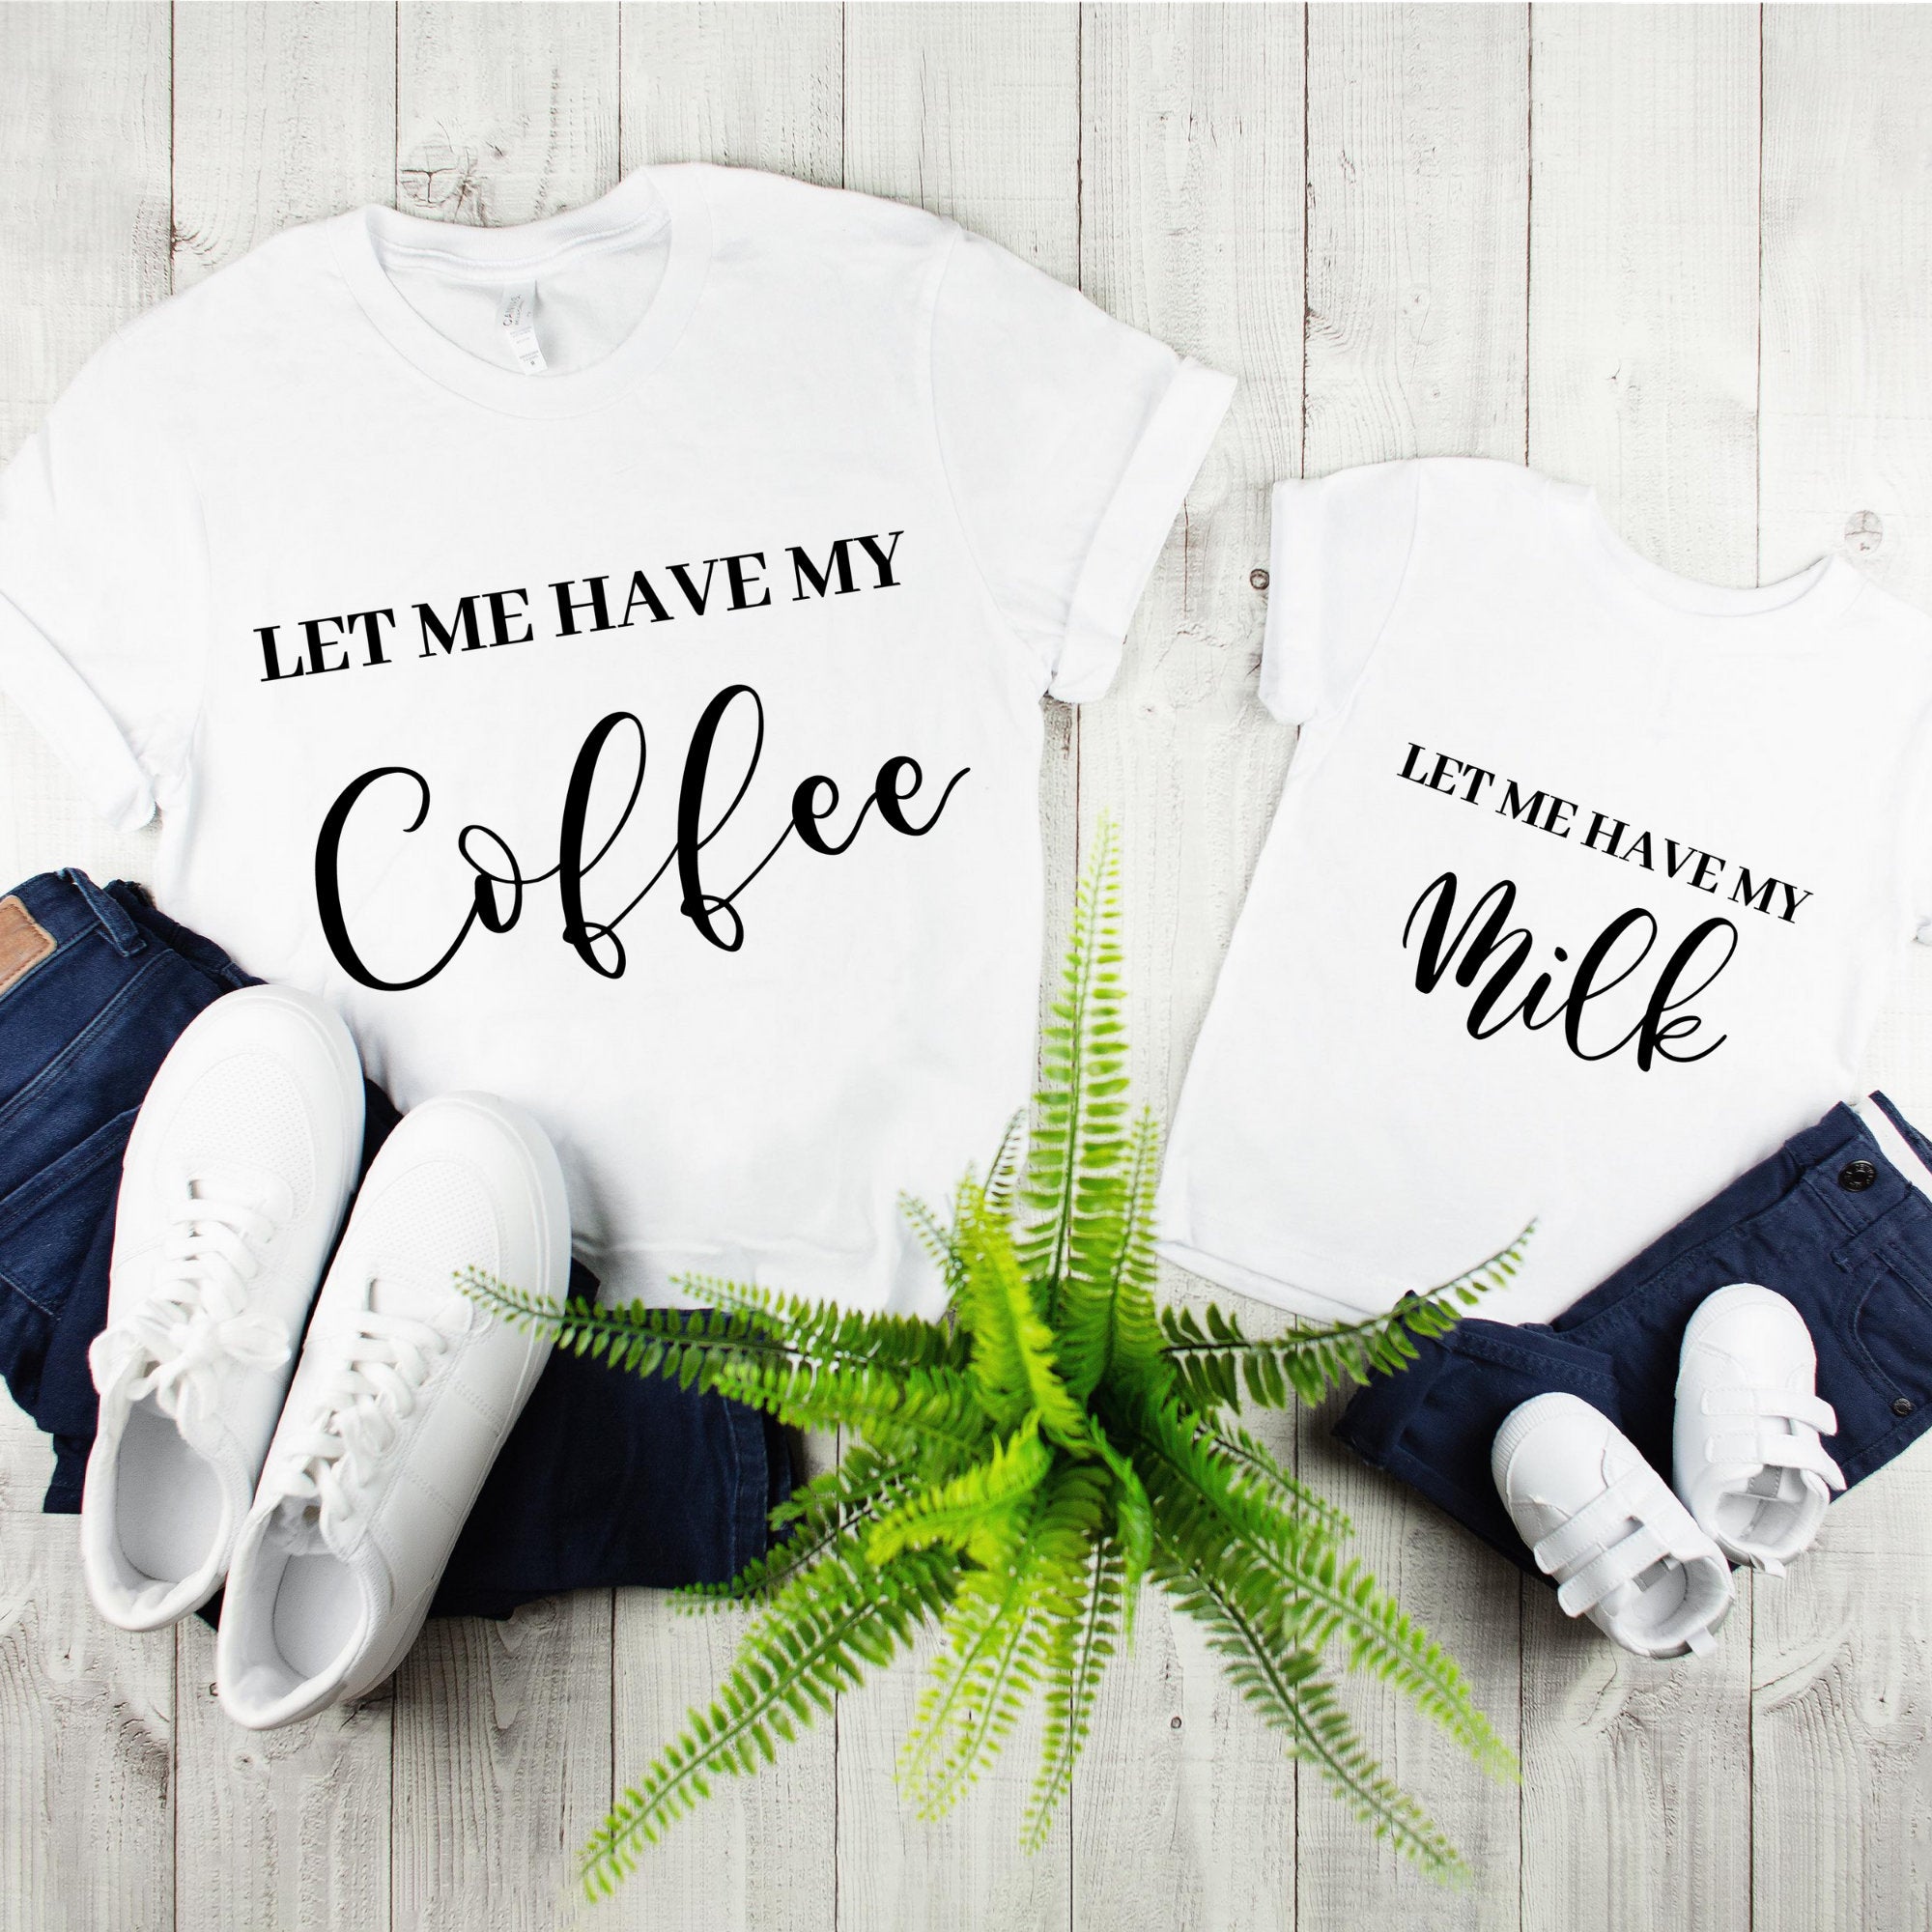 Let Me Have My Coffee & Let Me Have My Milk Tee,Daddy And Son Matching Shirts,Daddy And Me Matching,Gift For Dad And Son, Dad And Son Shirts - MamaBuzz Creations